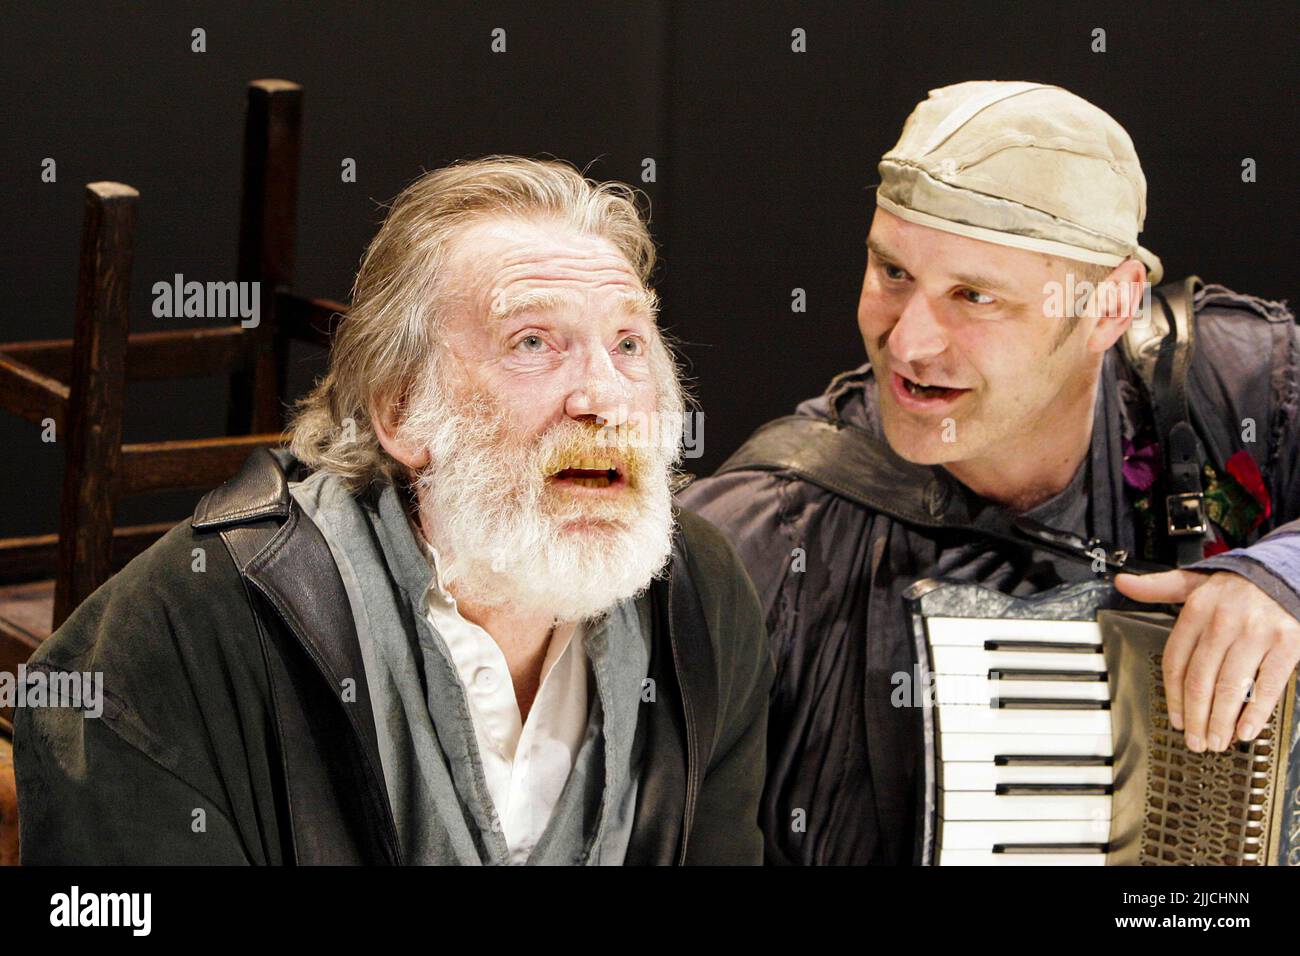 l-r: David Warner (King Lear), John Ramm (Fool) in KING LEAR by Shakespeare at the Minerva Theatre, Chichester Festival Theatre, West Sussex, England  17/05/2005 design: Alison Chitty  lighting: Paul Pyant  movement: Toby Sedgwick  director: Steven Pimlott Stock Photo